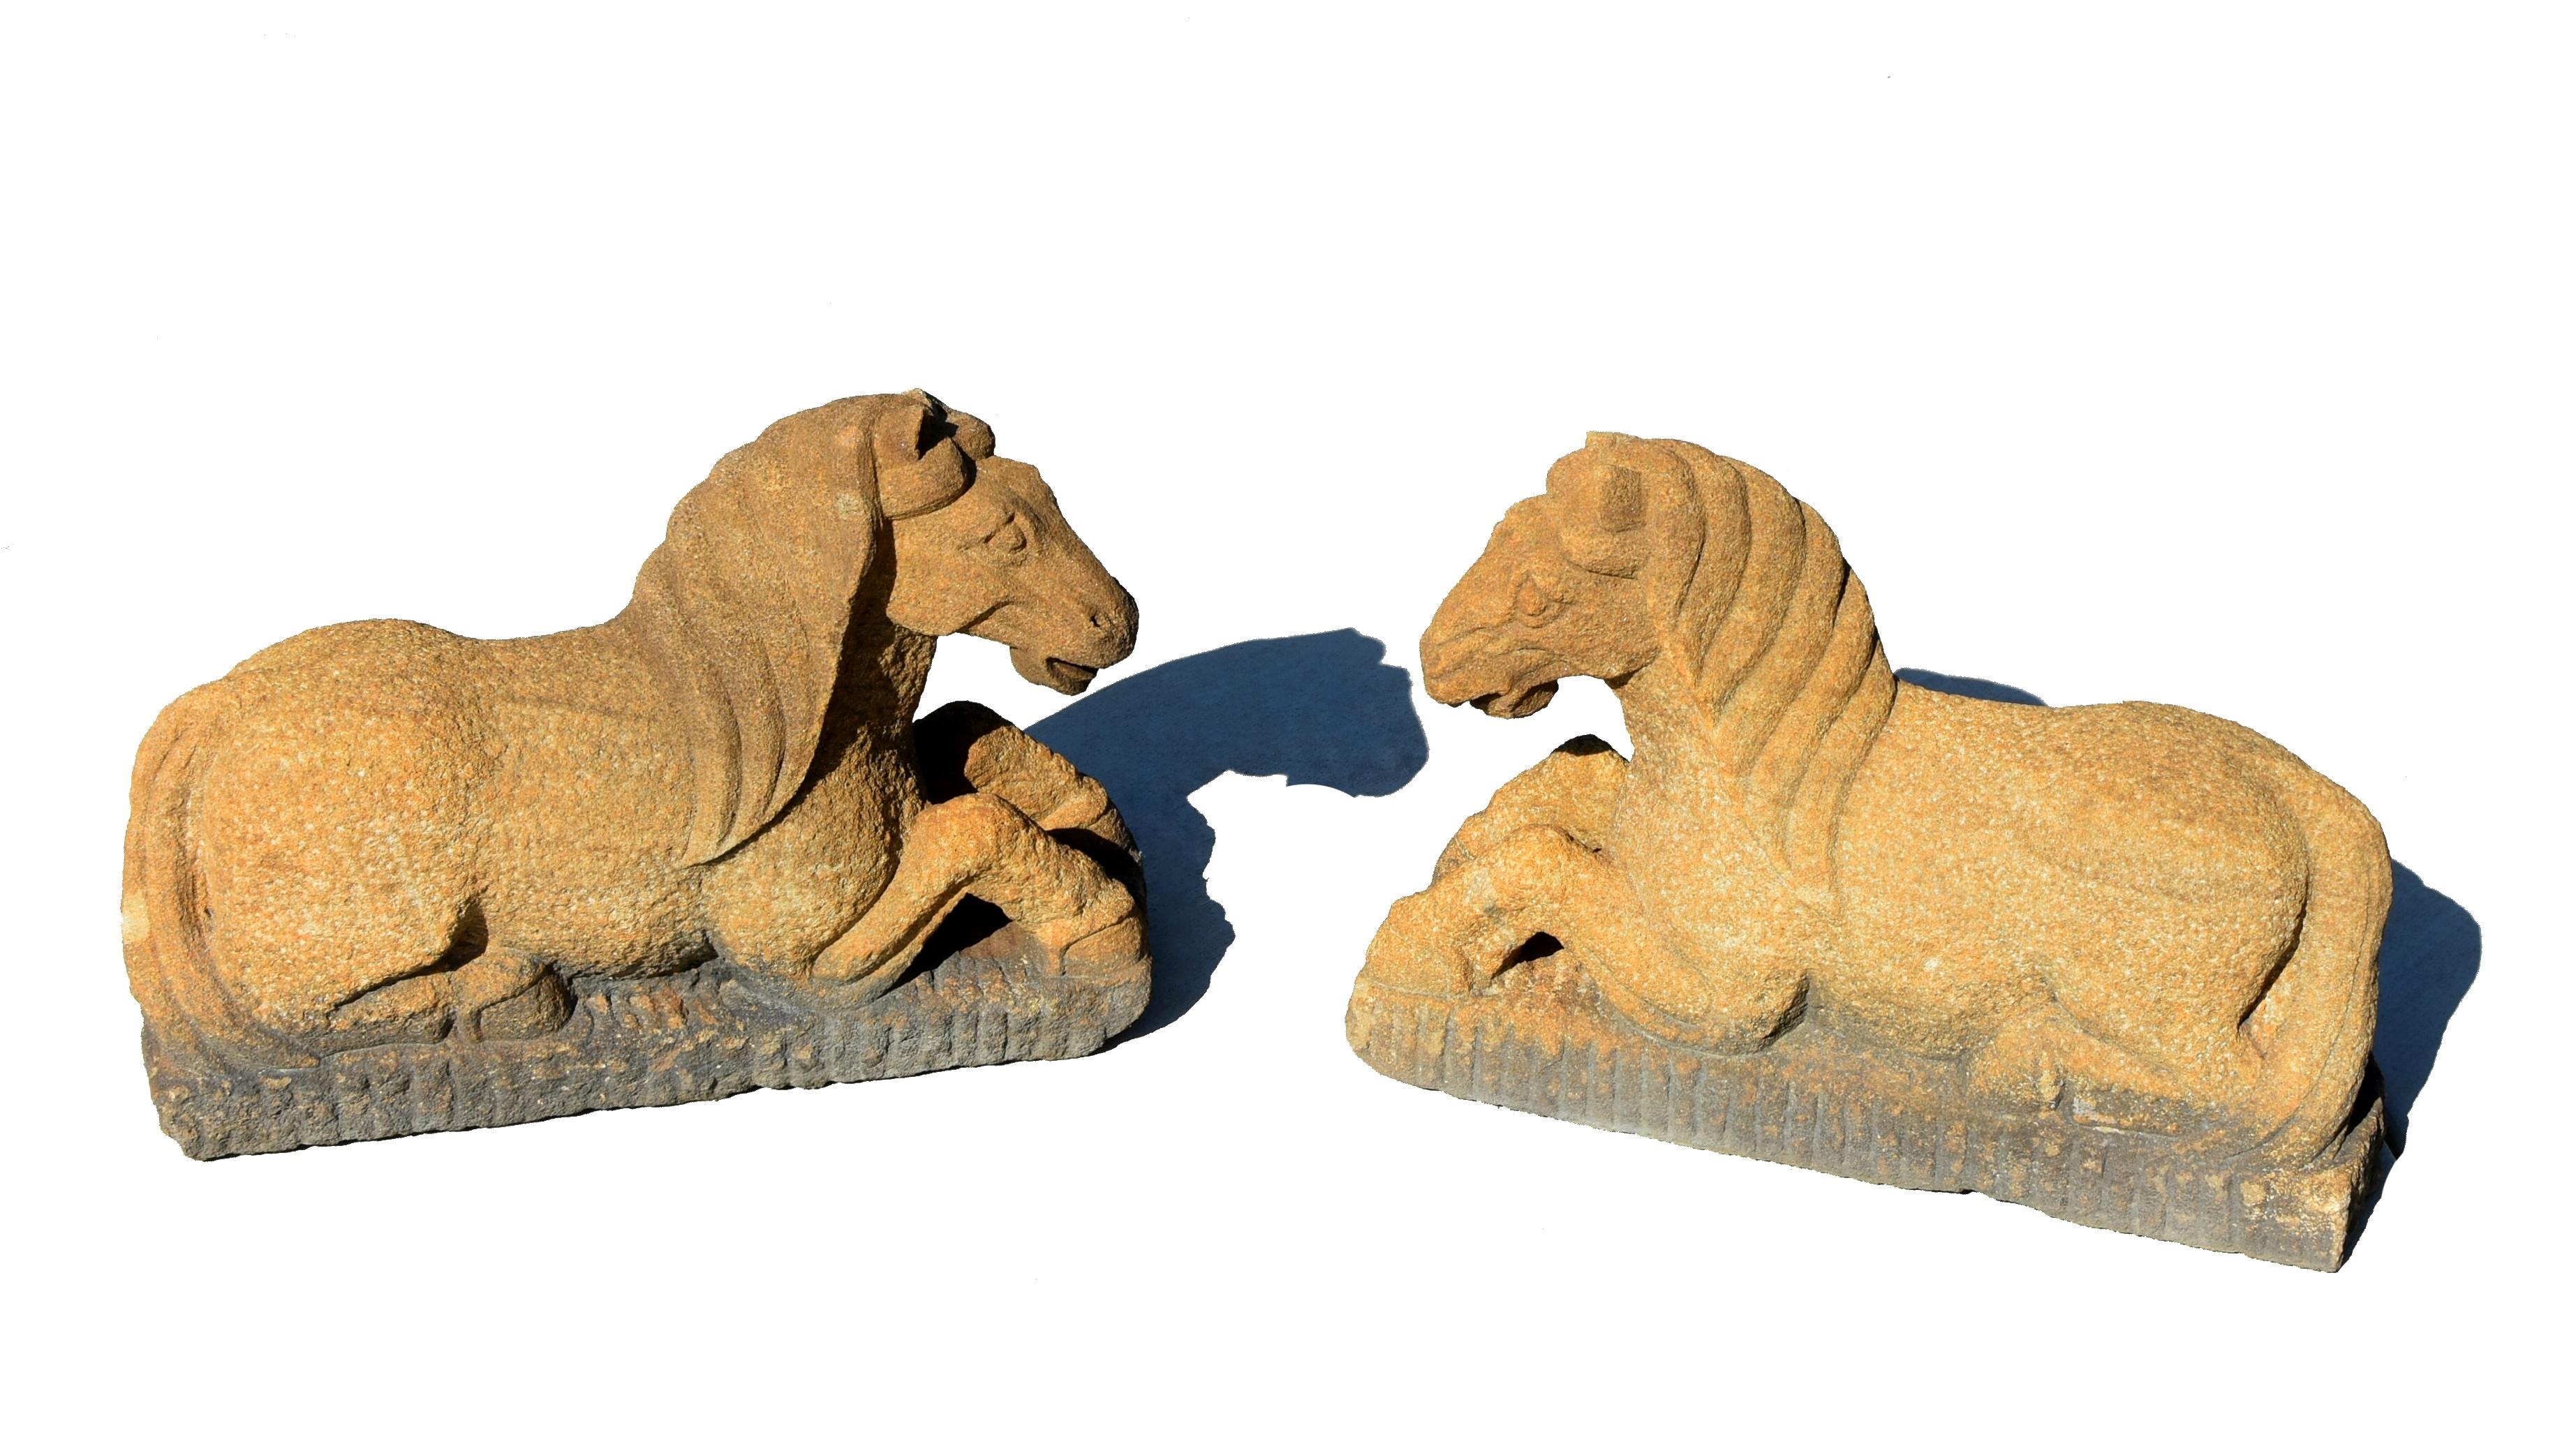 A pair of hand carved, large solid stone horse statues. The recumbent horses are crafted with two legs tucked under the body and tail flicked to one side. The well incised manes drapes around the heads behind the forward-pricked ears. The muscular